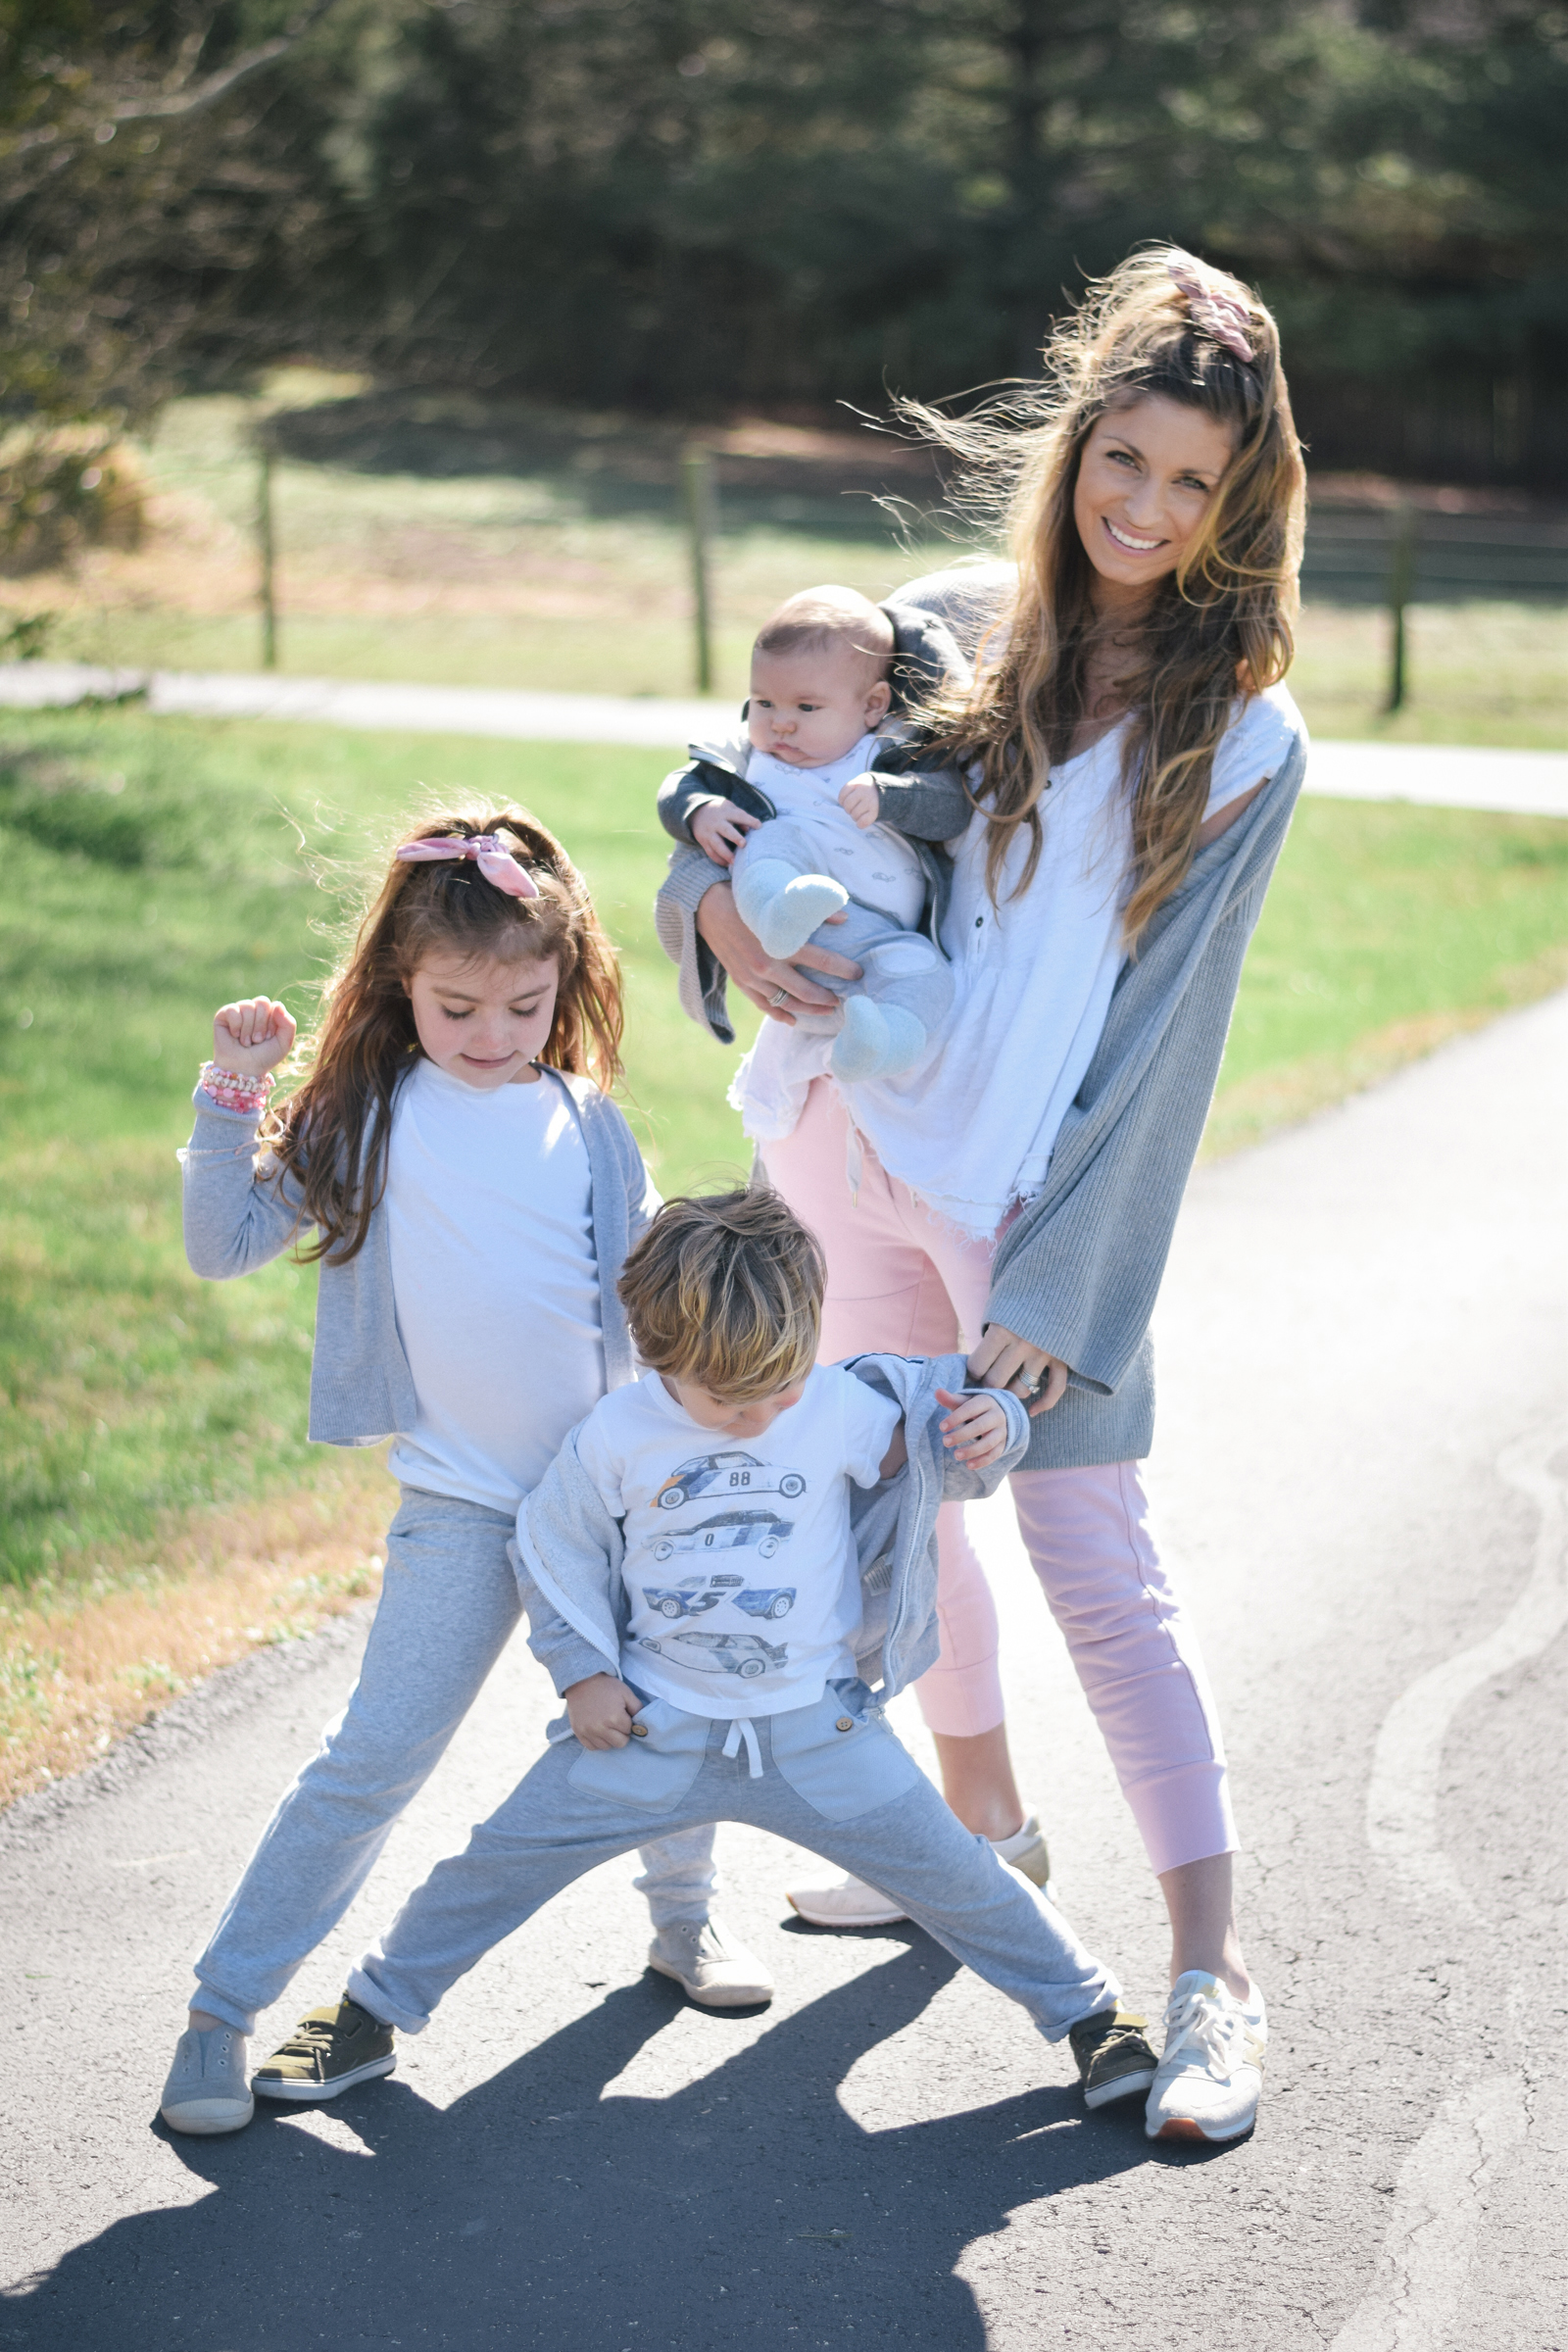 the family that joggers together…